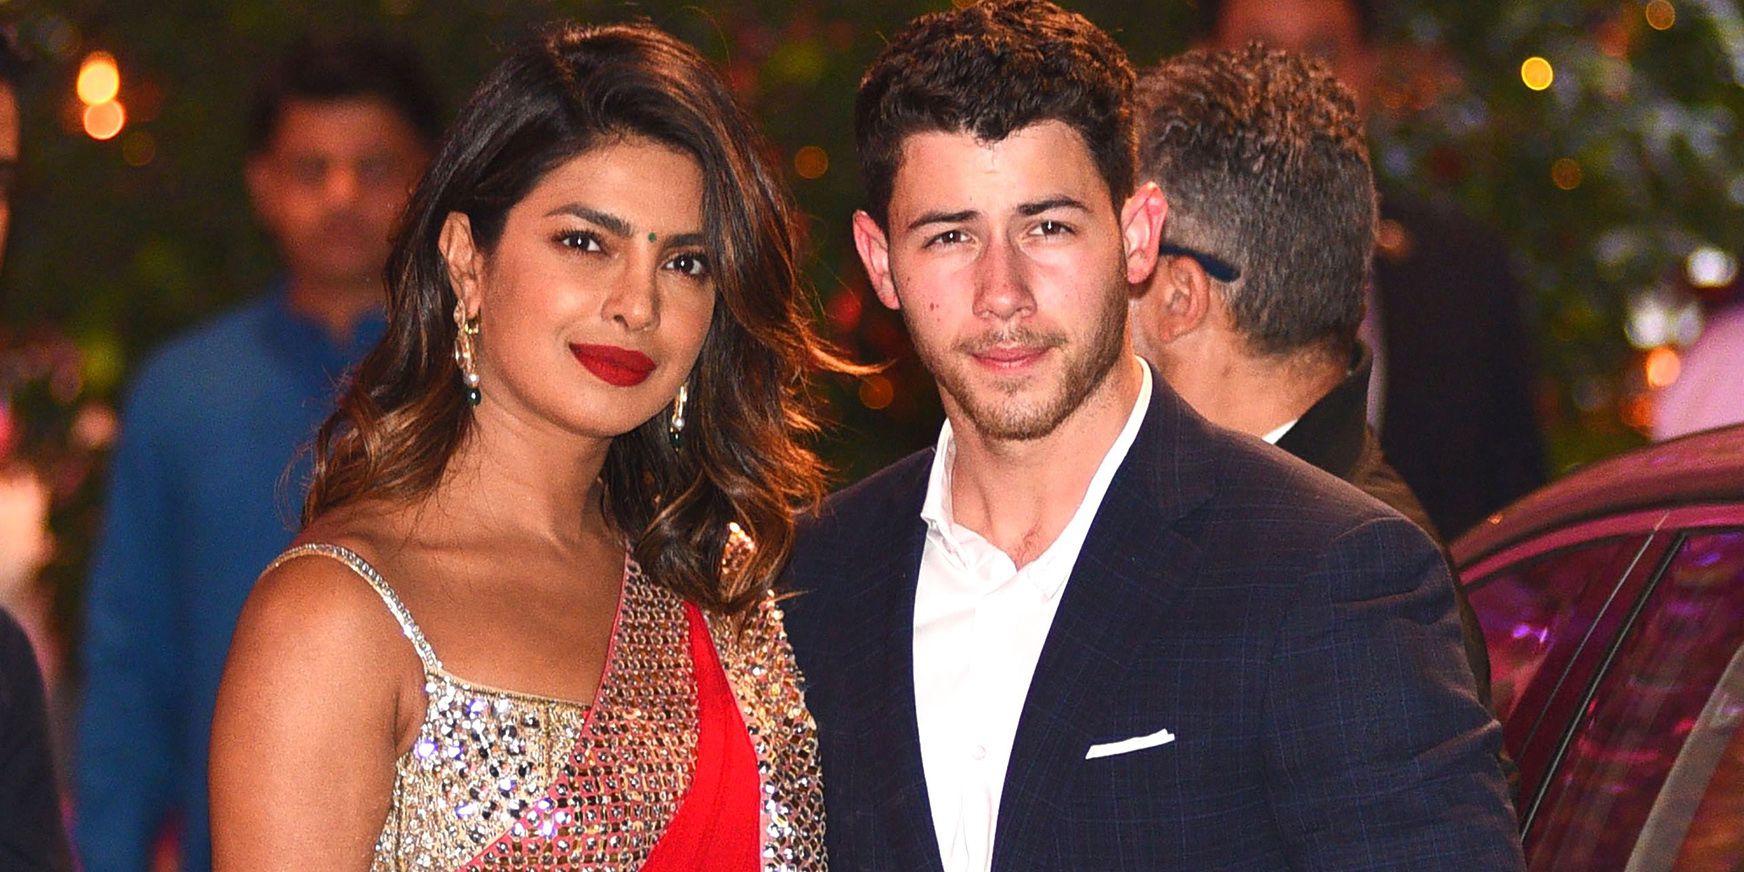 Kangana confirms Priyanka Chopra is 'happy and excited' about marriage with Nick